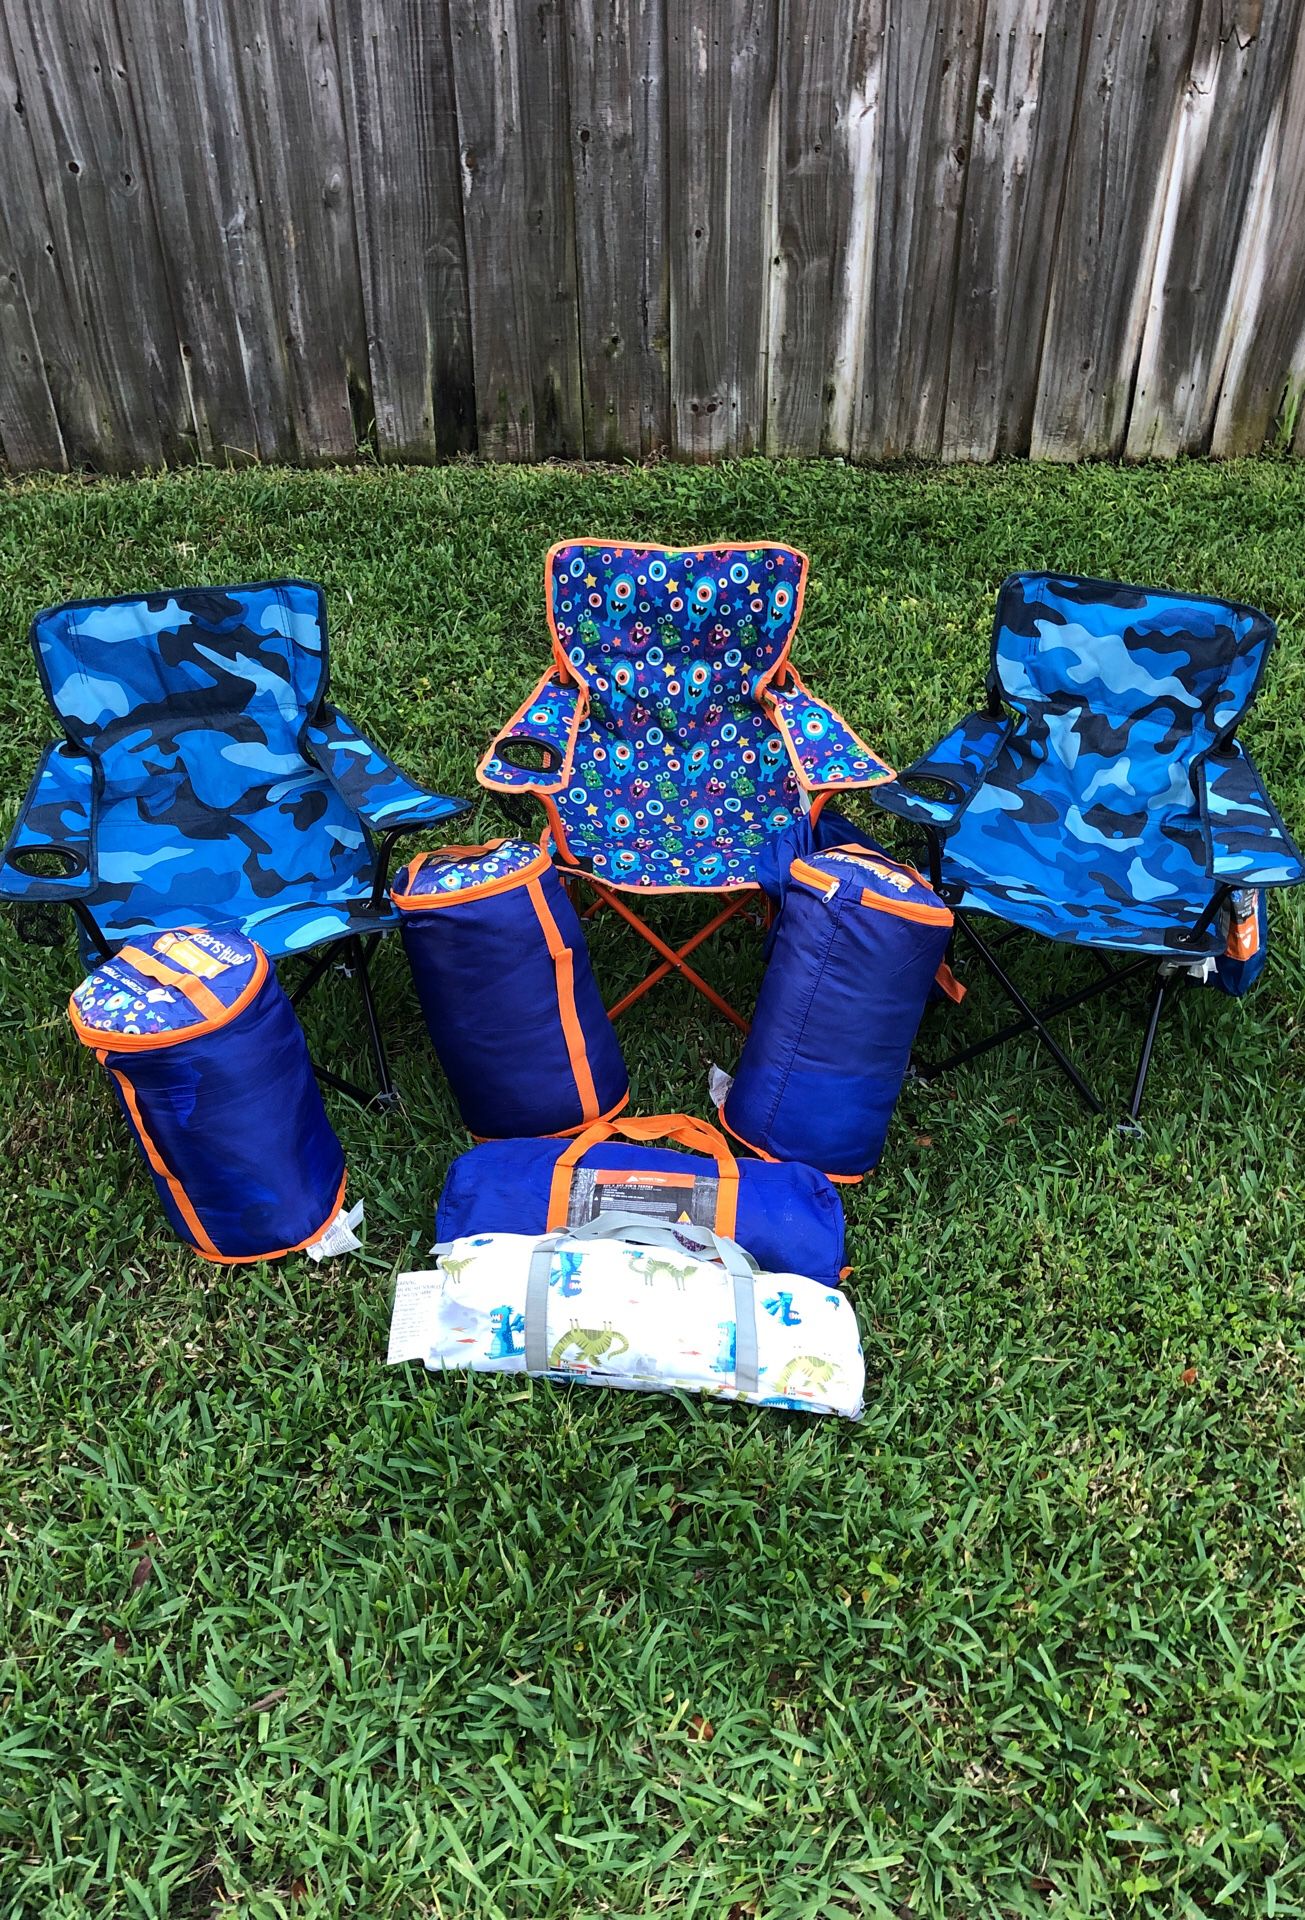 Kids camping gear. 3 chairs, 2 tents & 3 sleeping bags